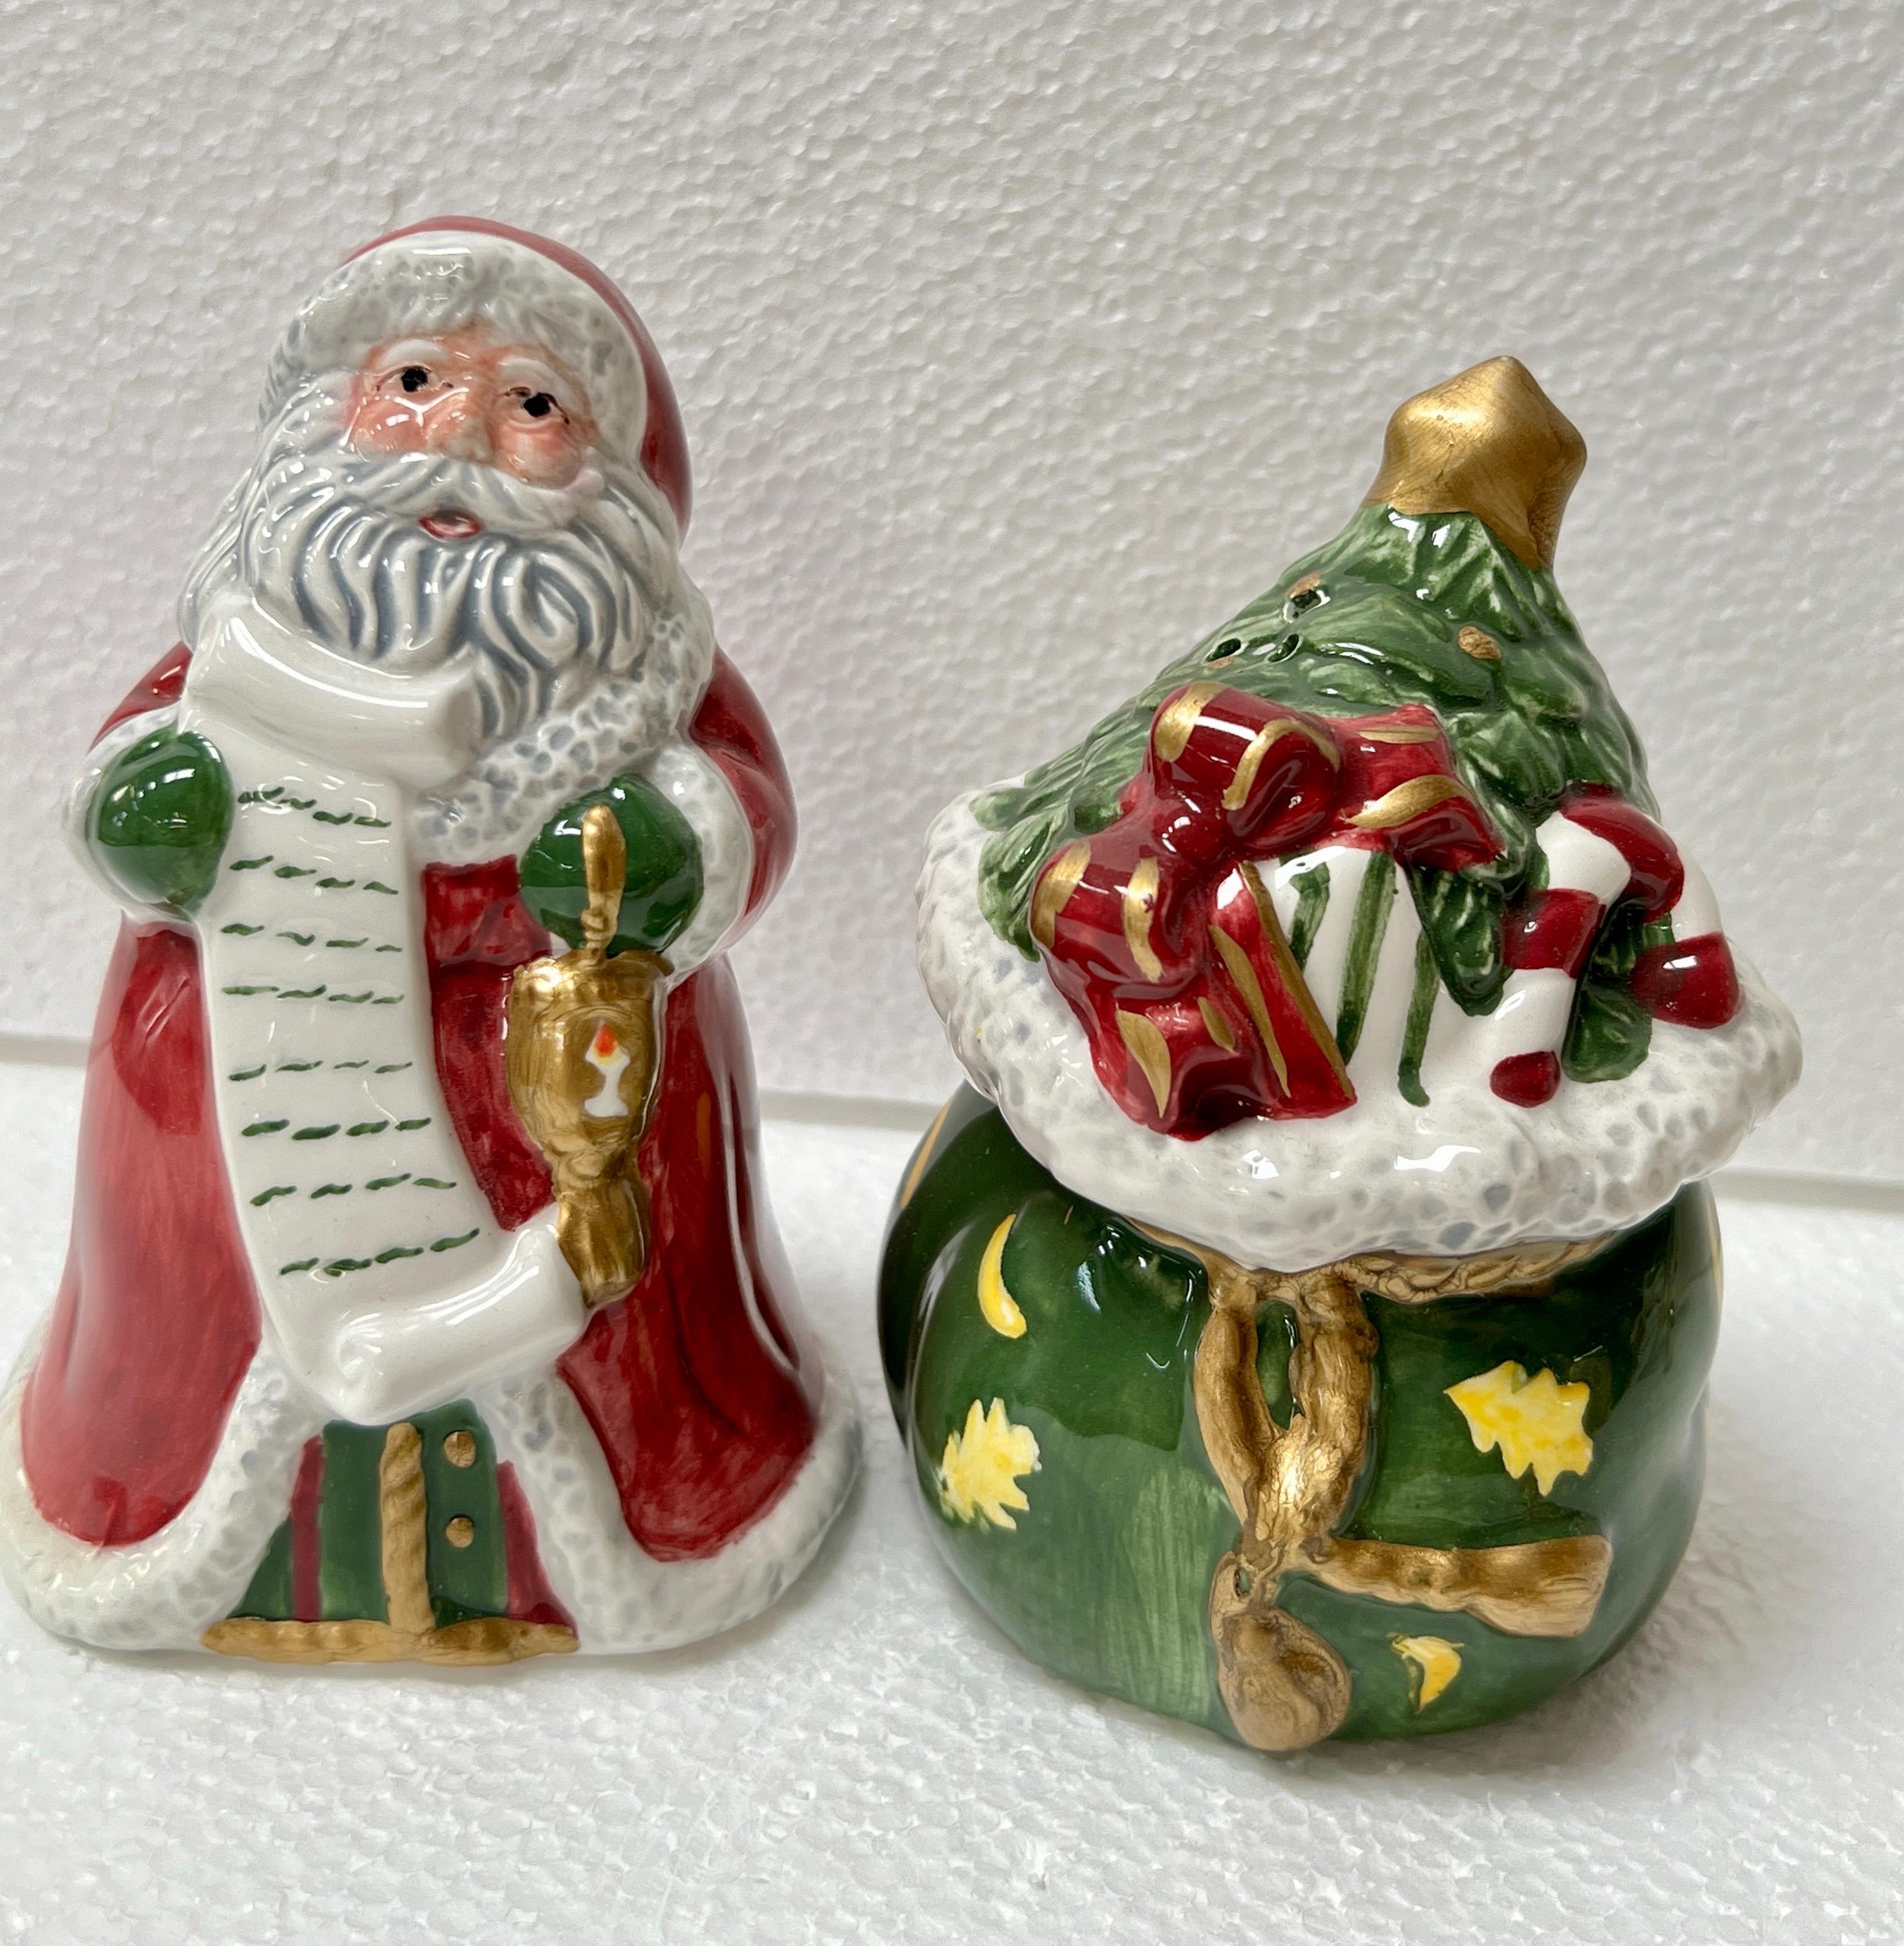 7PC SETS OF HOLIDAY SALT AND PEPPER SHAKERS